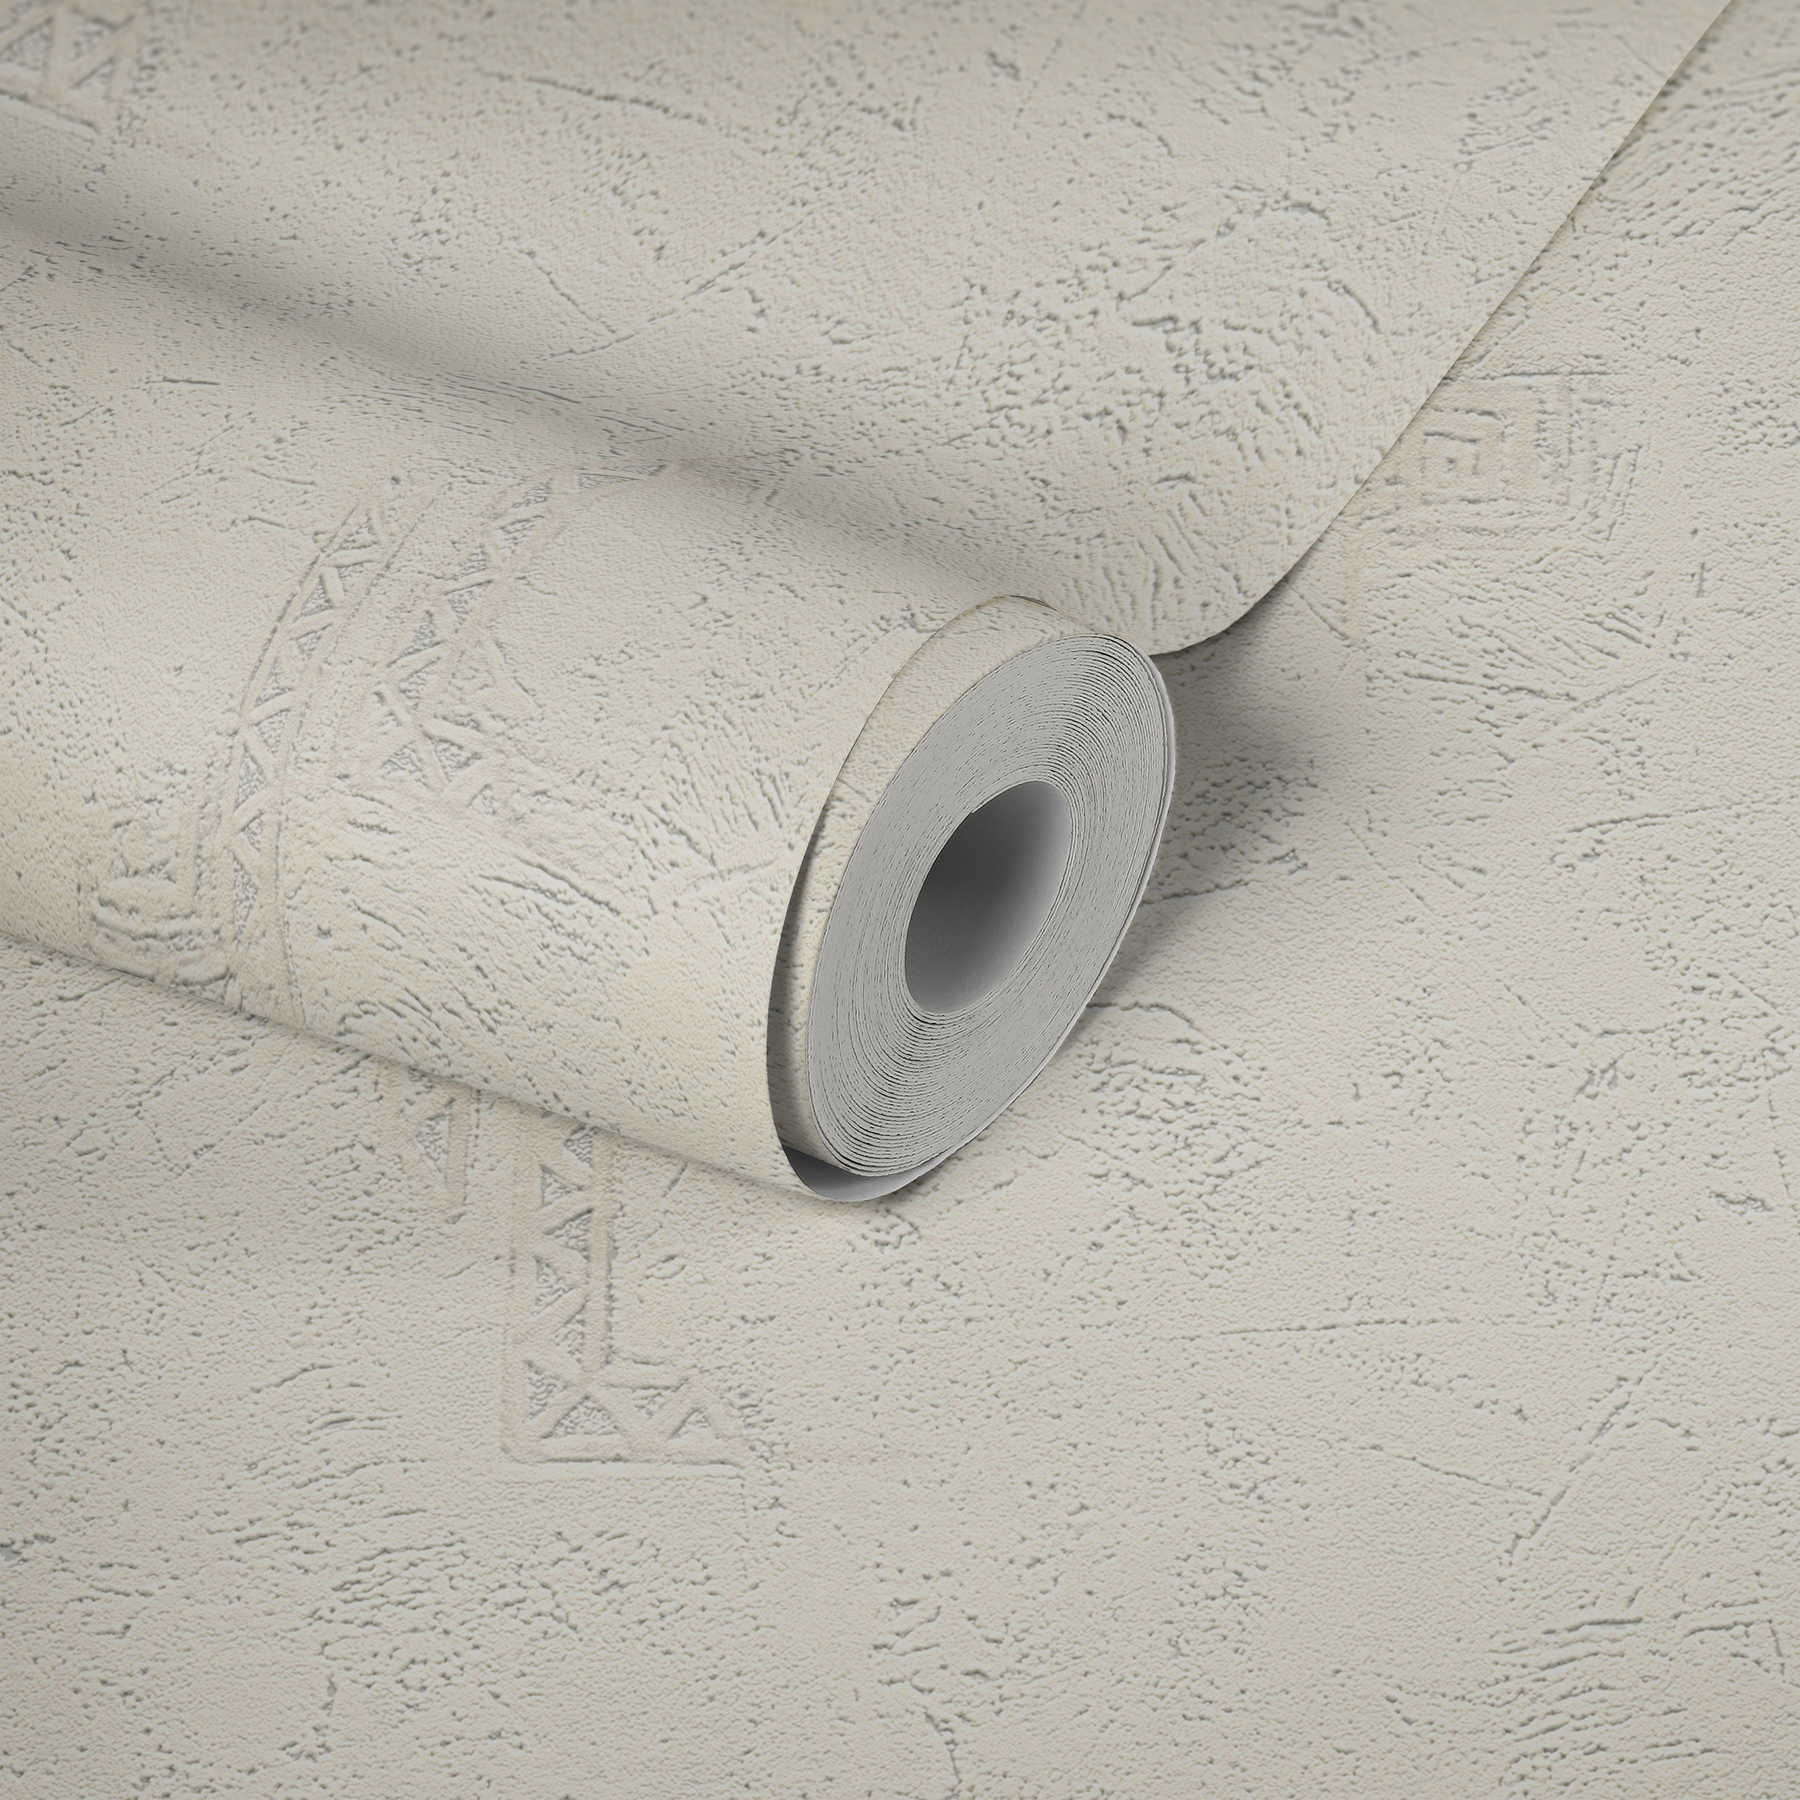             Wallpaper with plaster texture and graphic elements - grey, white
        